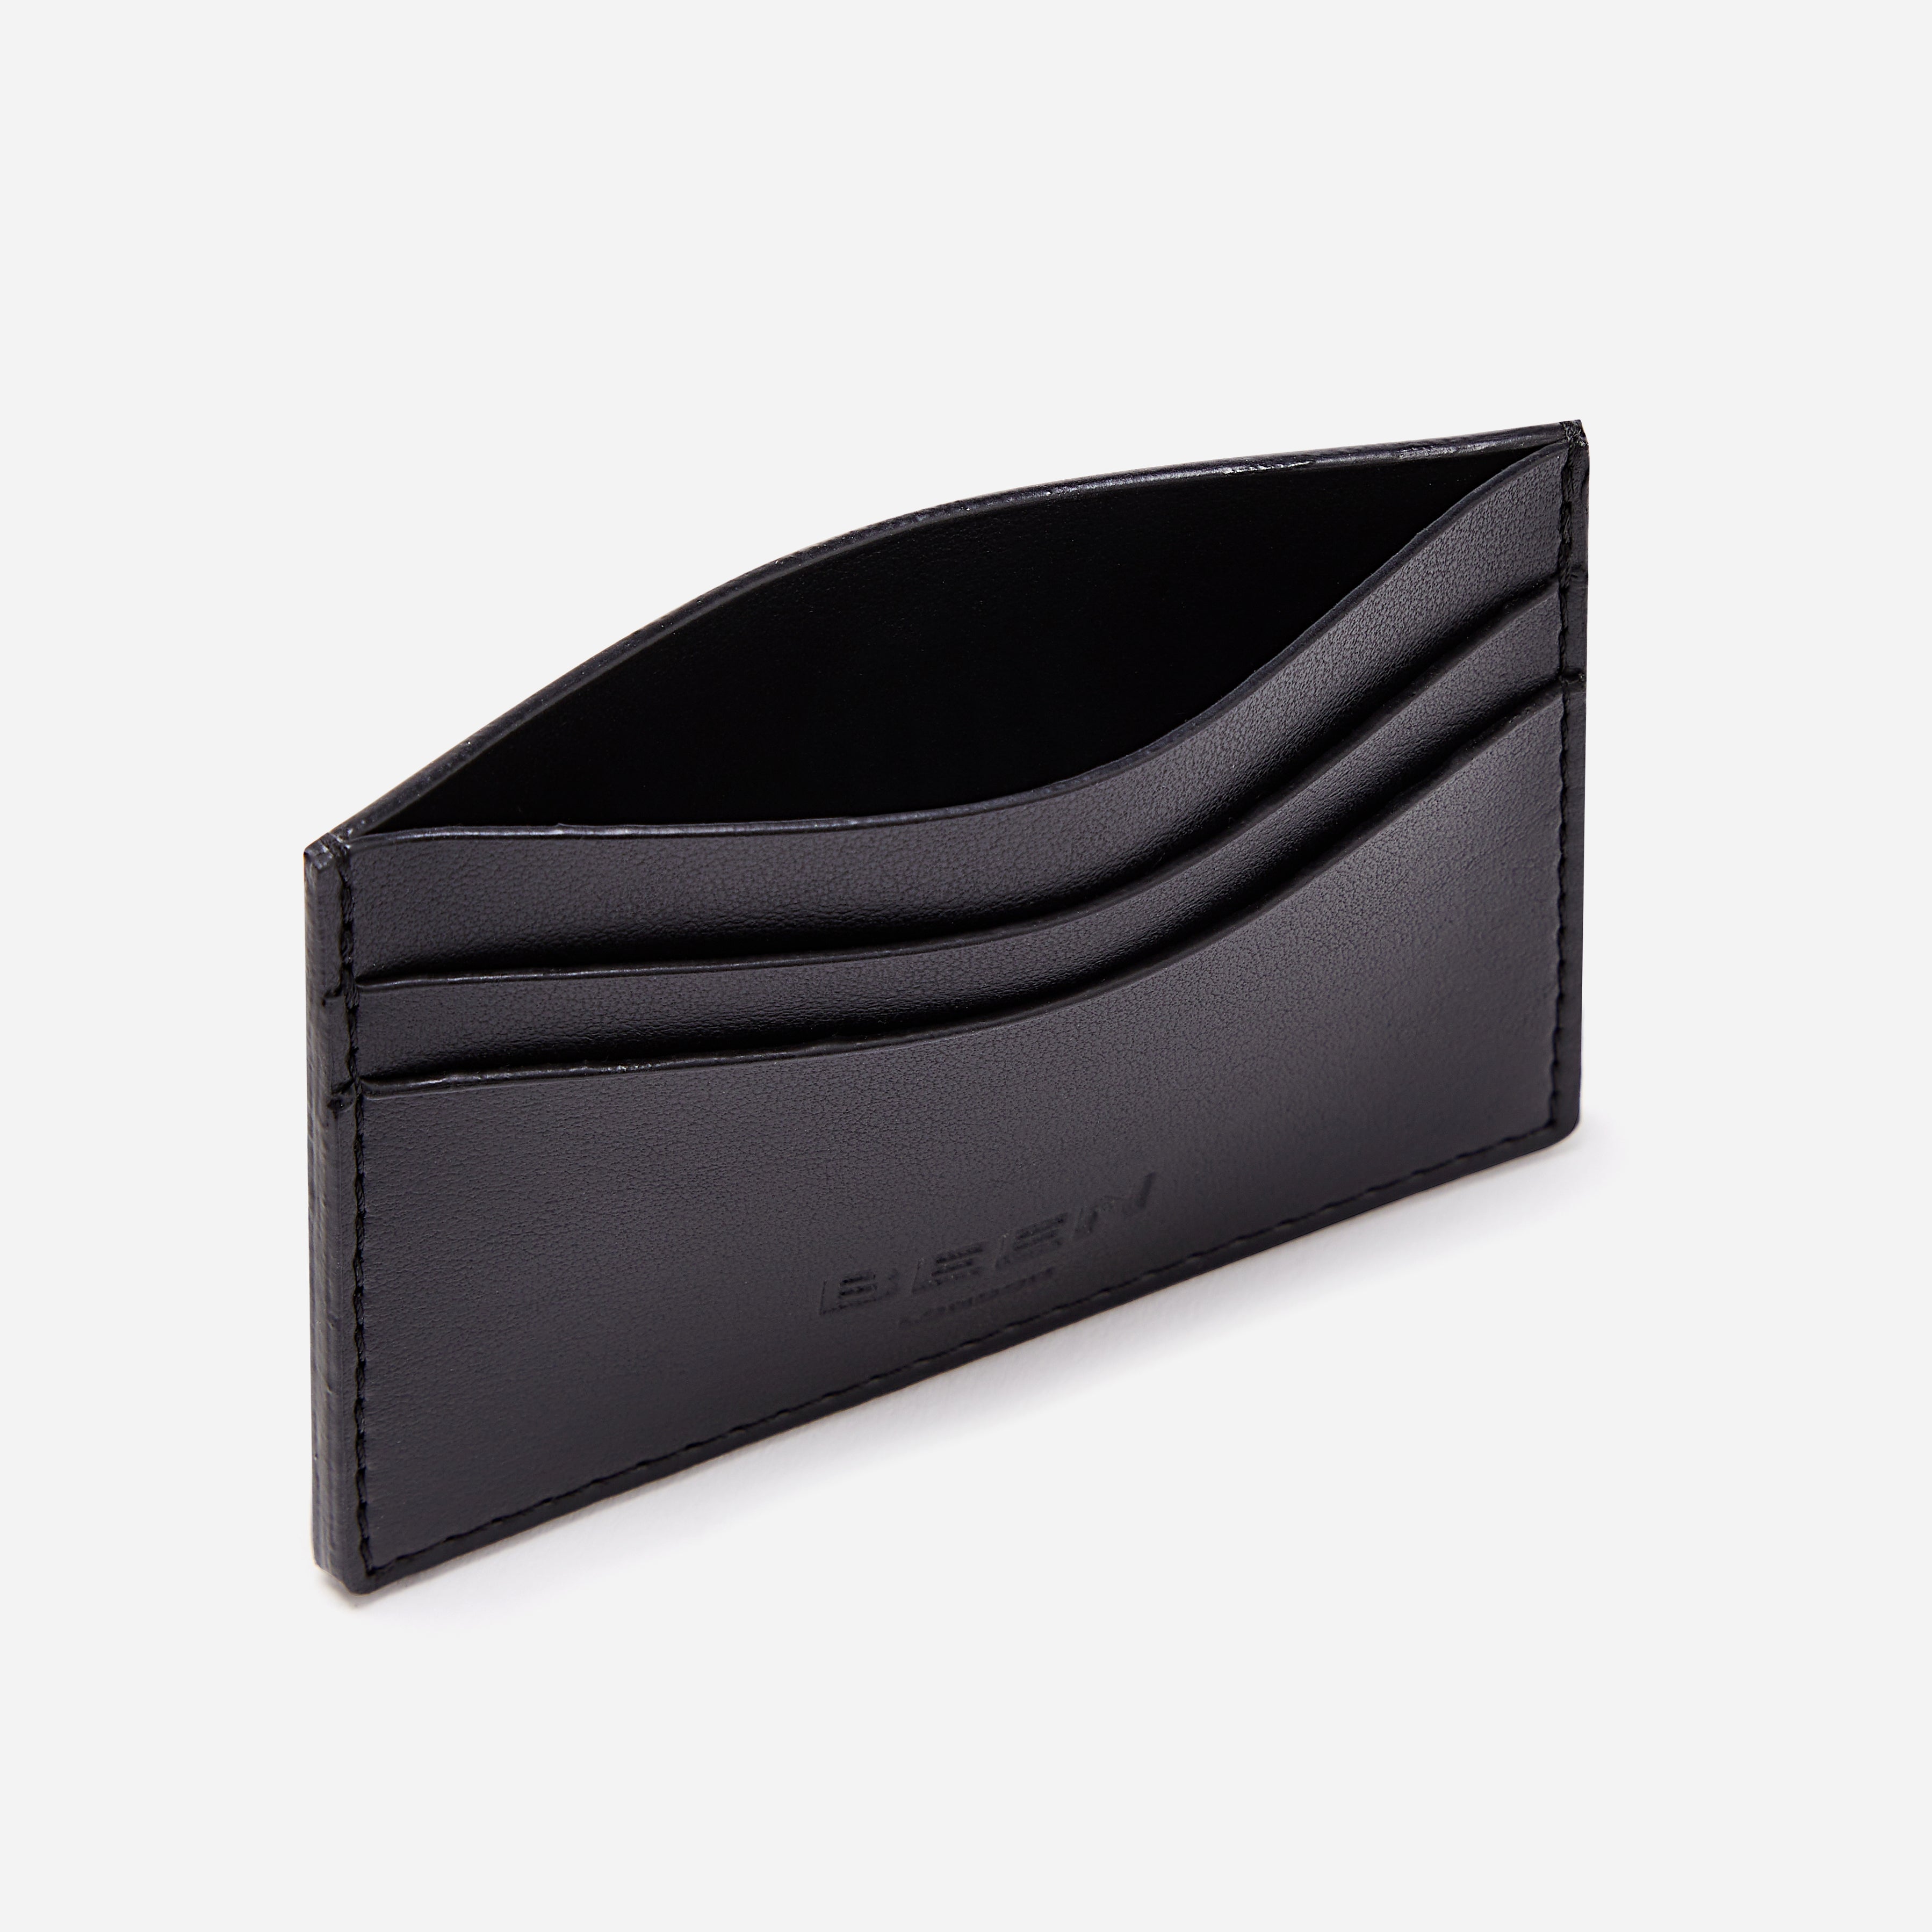 Vegan leather Wick Cardholder in Black onyx with opening to show ample space for cards